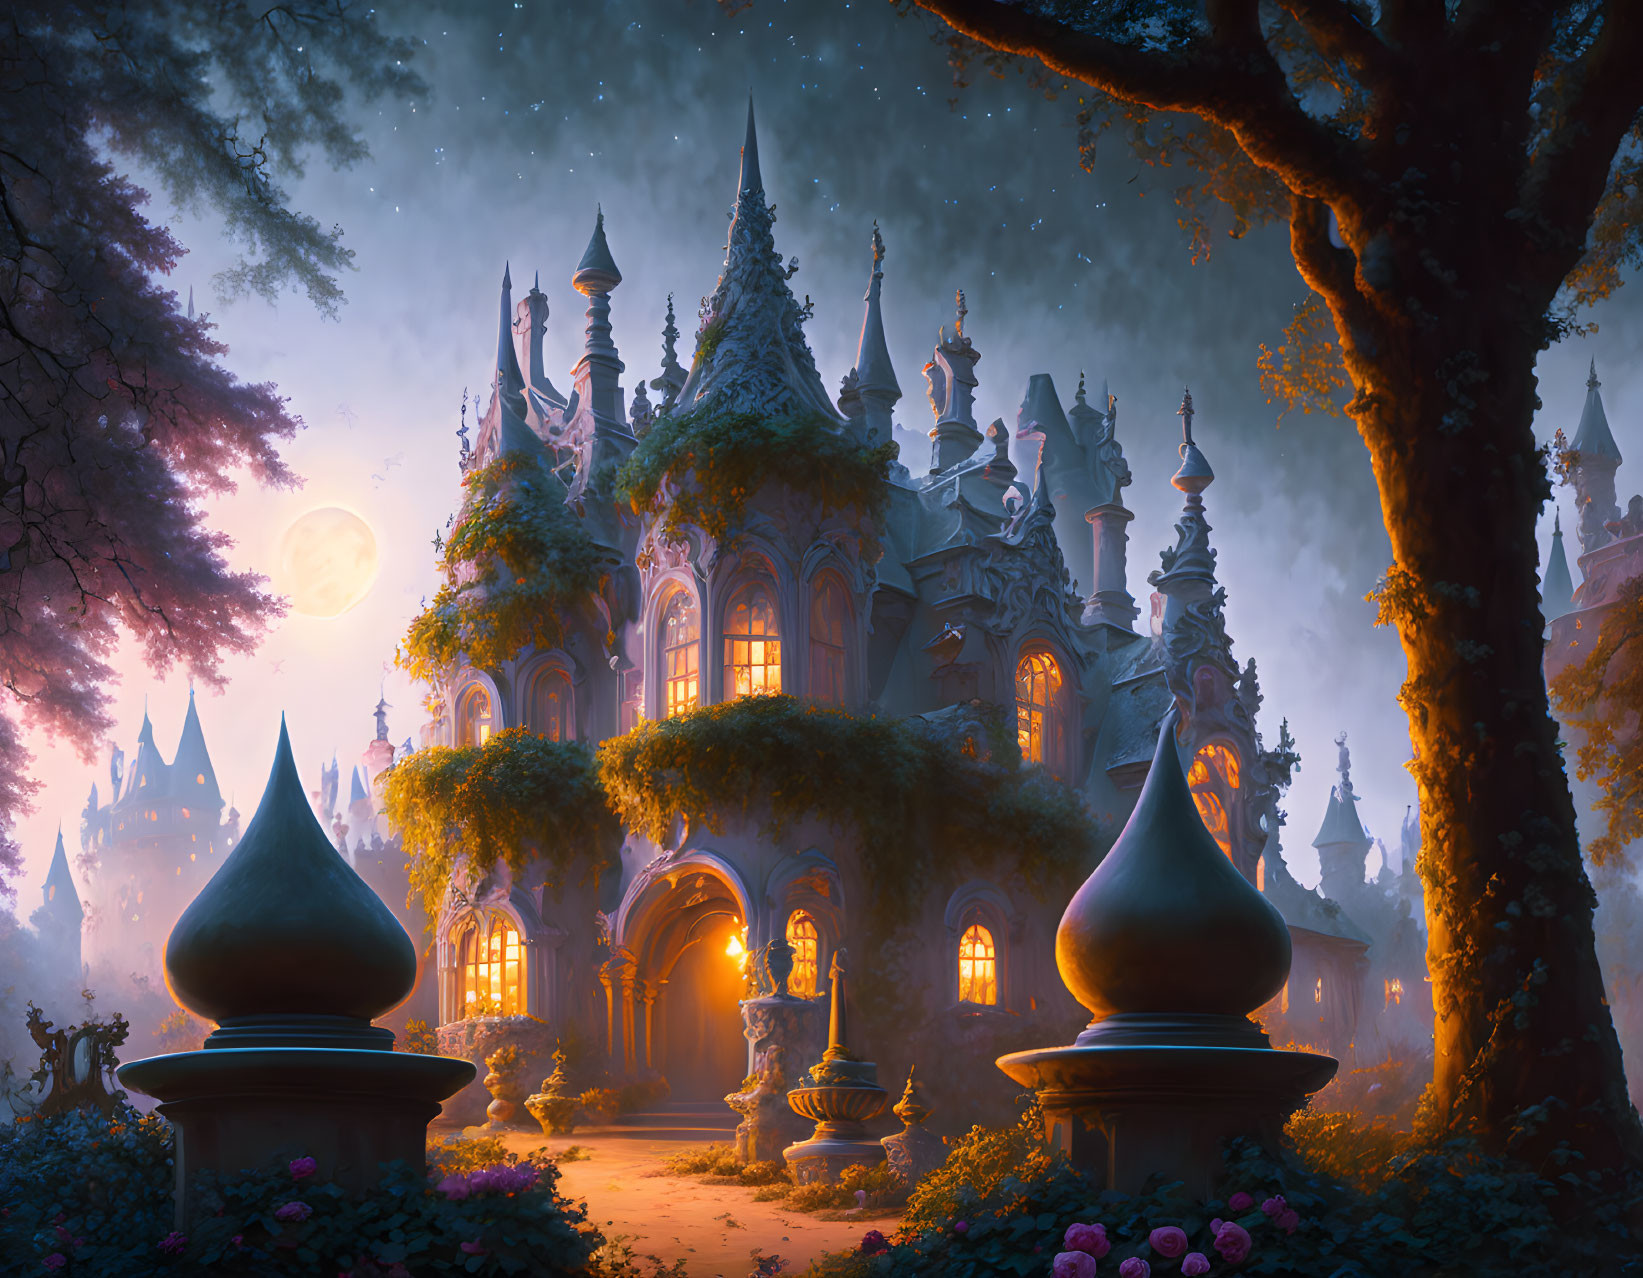 Enchanted gothic castle in twilight forest with full moon